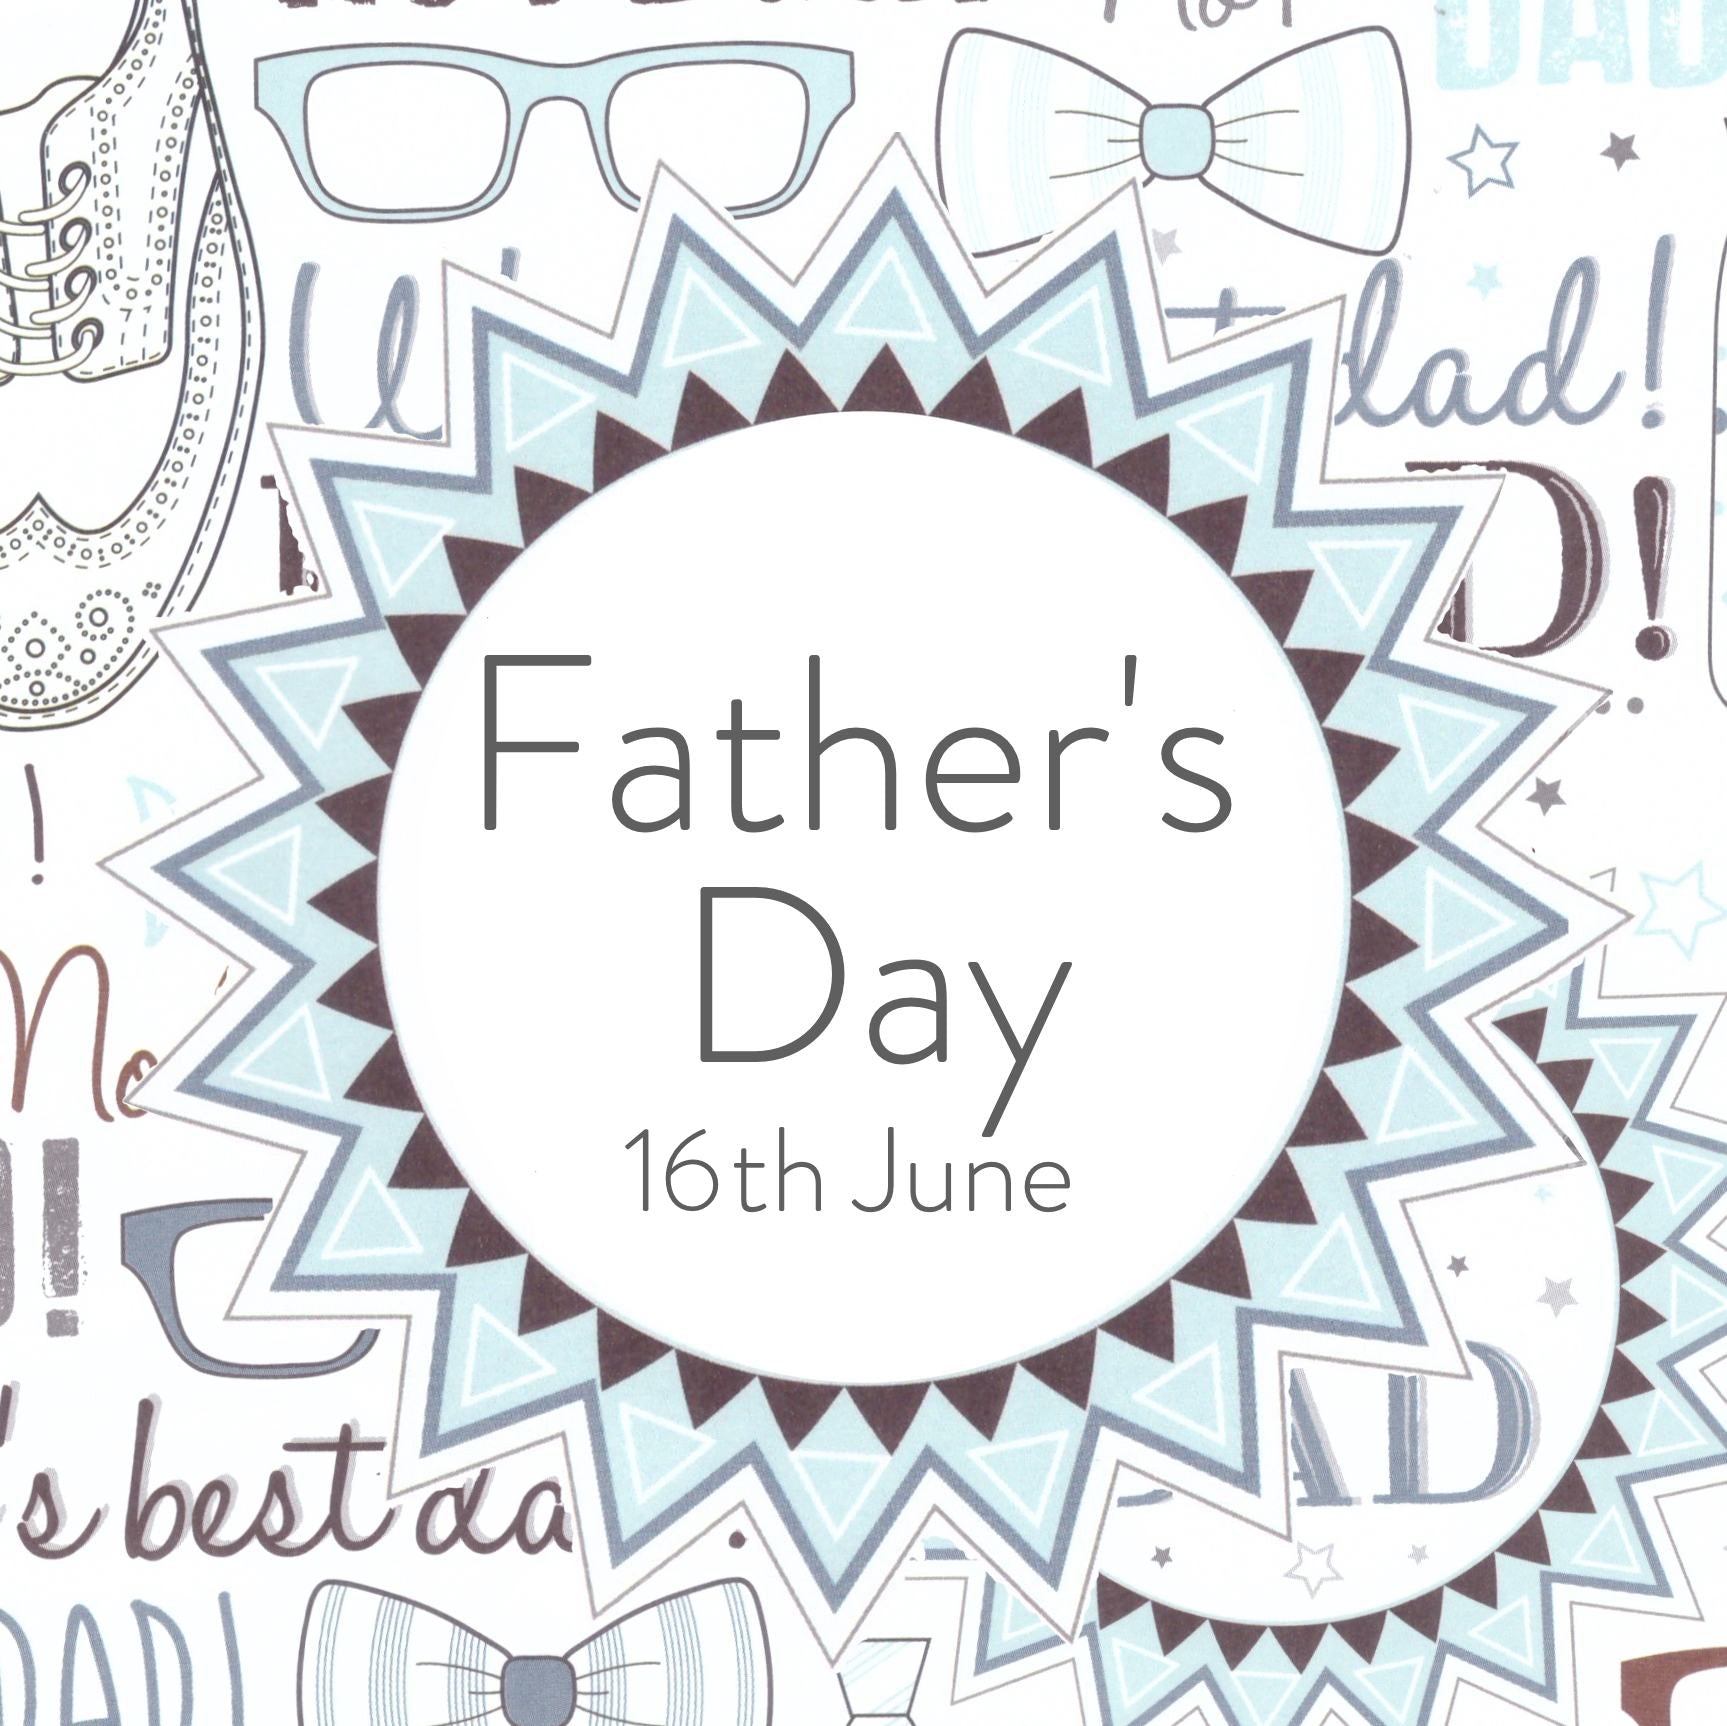 Father's Day, the More Than Just a Gift way - Our top Five Gift Buying Guide